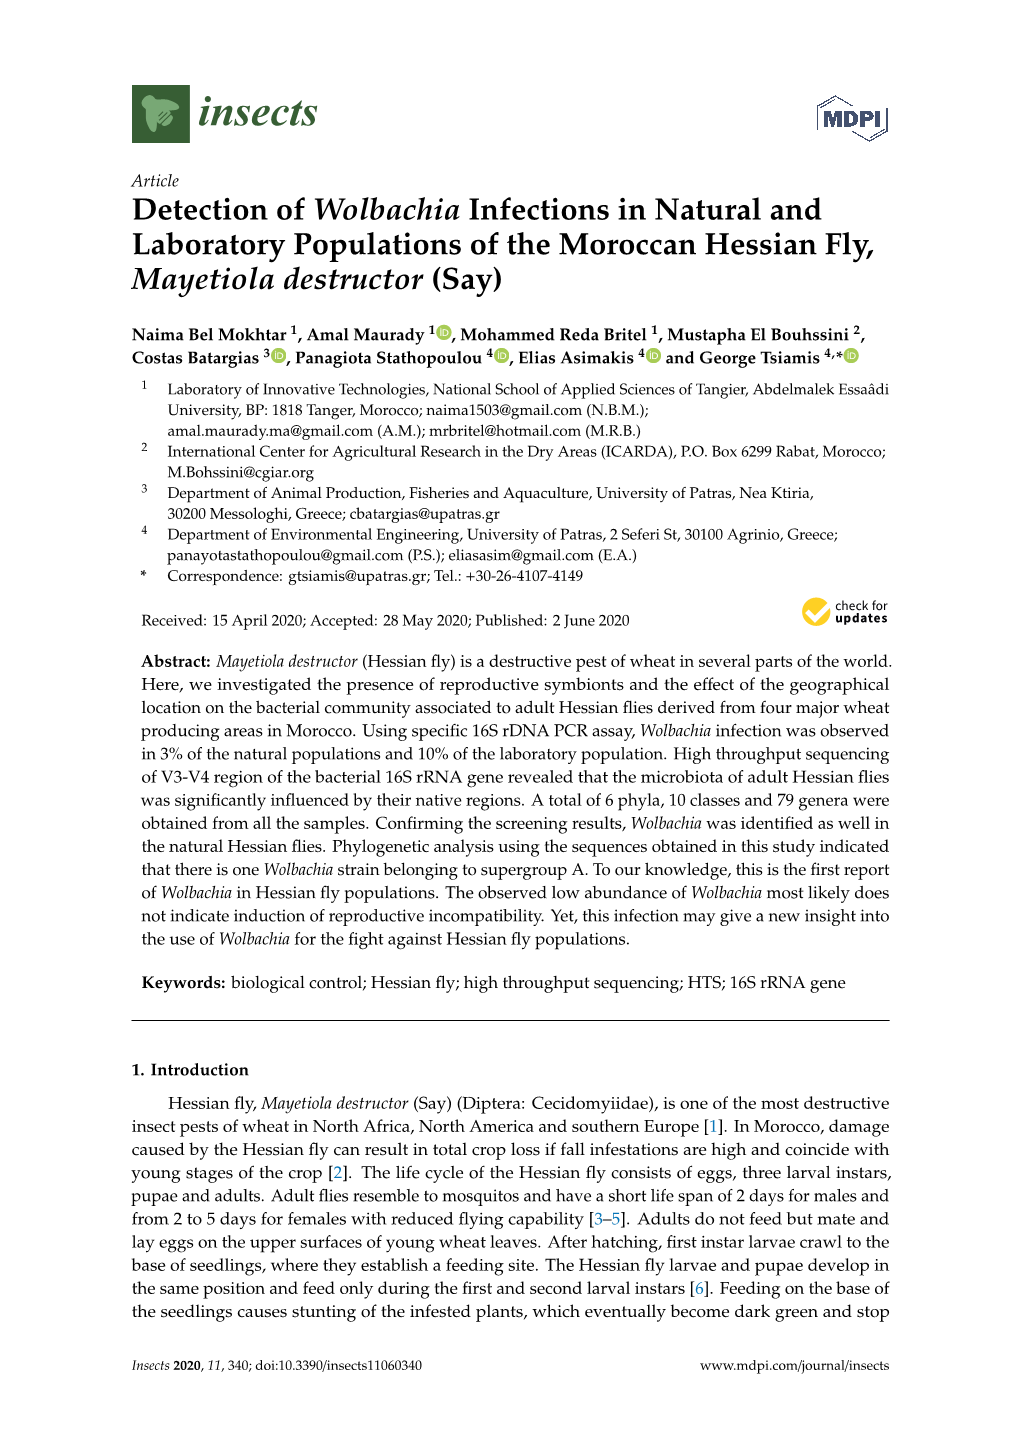 Detection of Wolbachia Infections in Natural and Laboratory Populations of the Moroccan Hessian Fly, Mayetiola Destructor (Say)